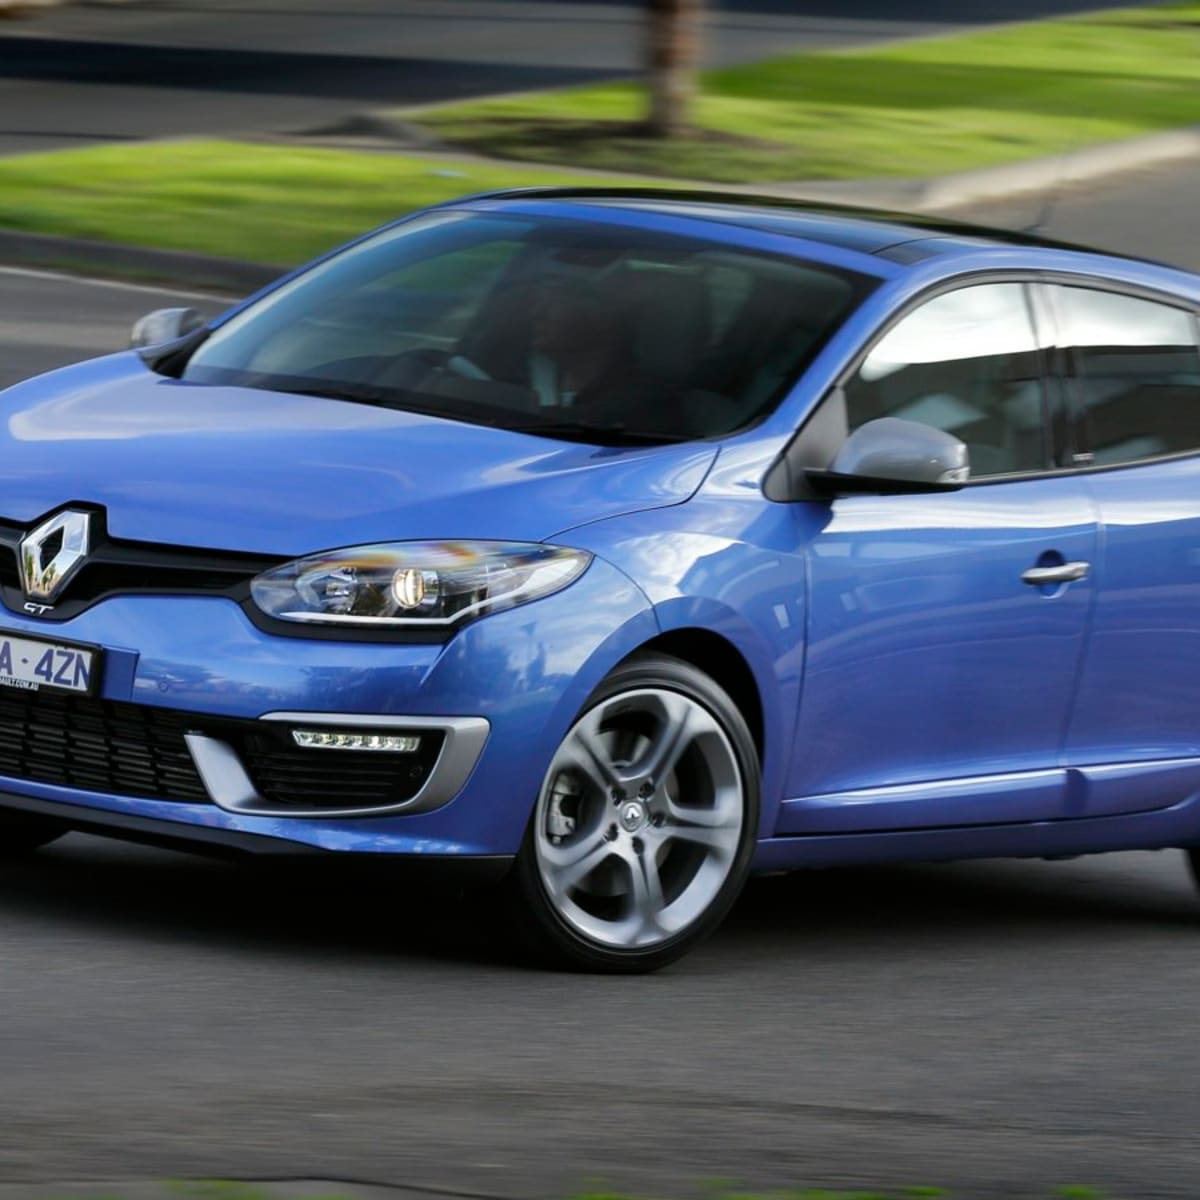 14 Renault Megane Gt 2 Review Caradvice